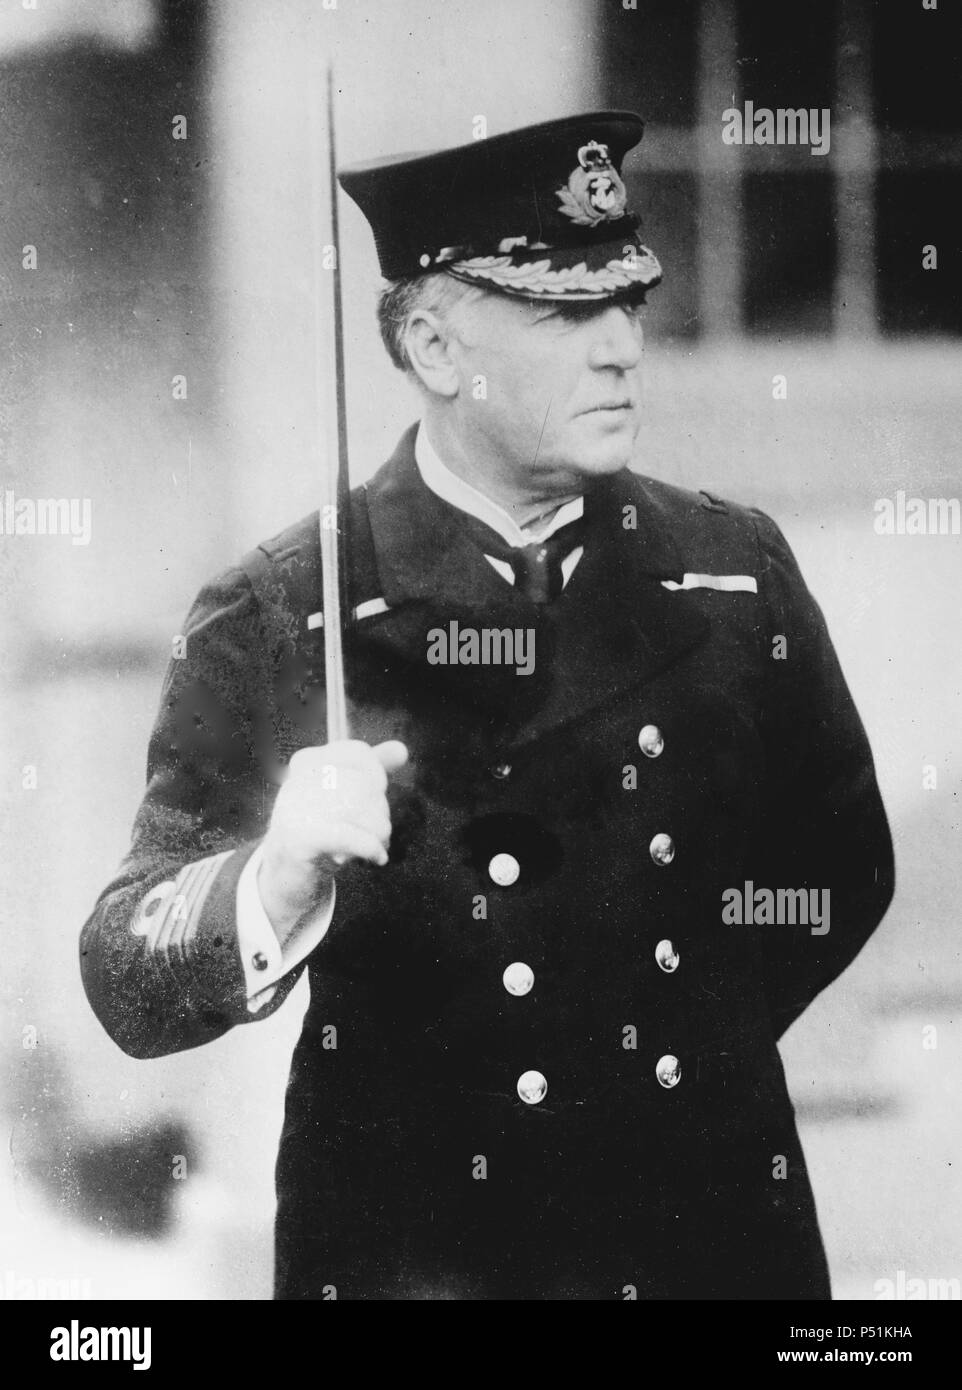 Charles William de la Poer Beresford, 1st Baron Beresford,  (10 February 1846 – 6 September 1919), styled Lord Charles Beresford between 1859 and 1916, was a British admiral and Member of Parliament. Stock Photo